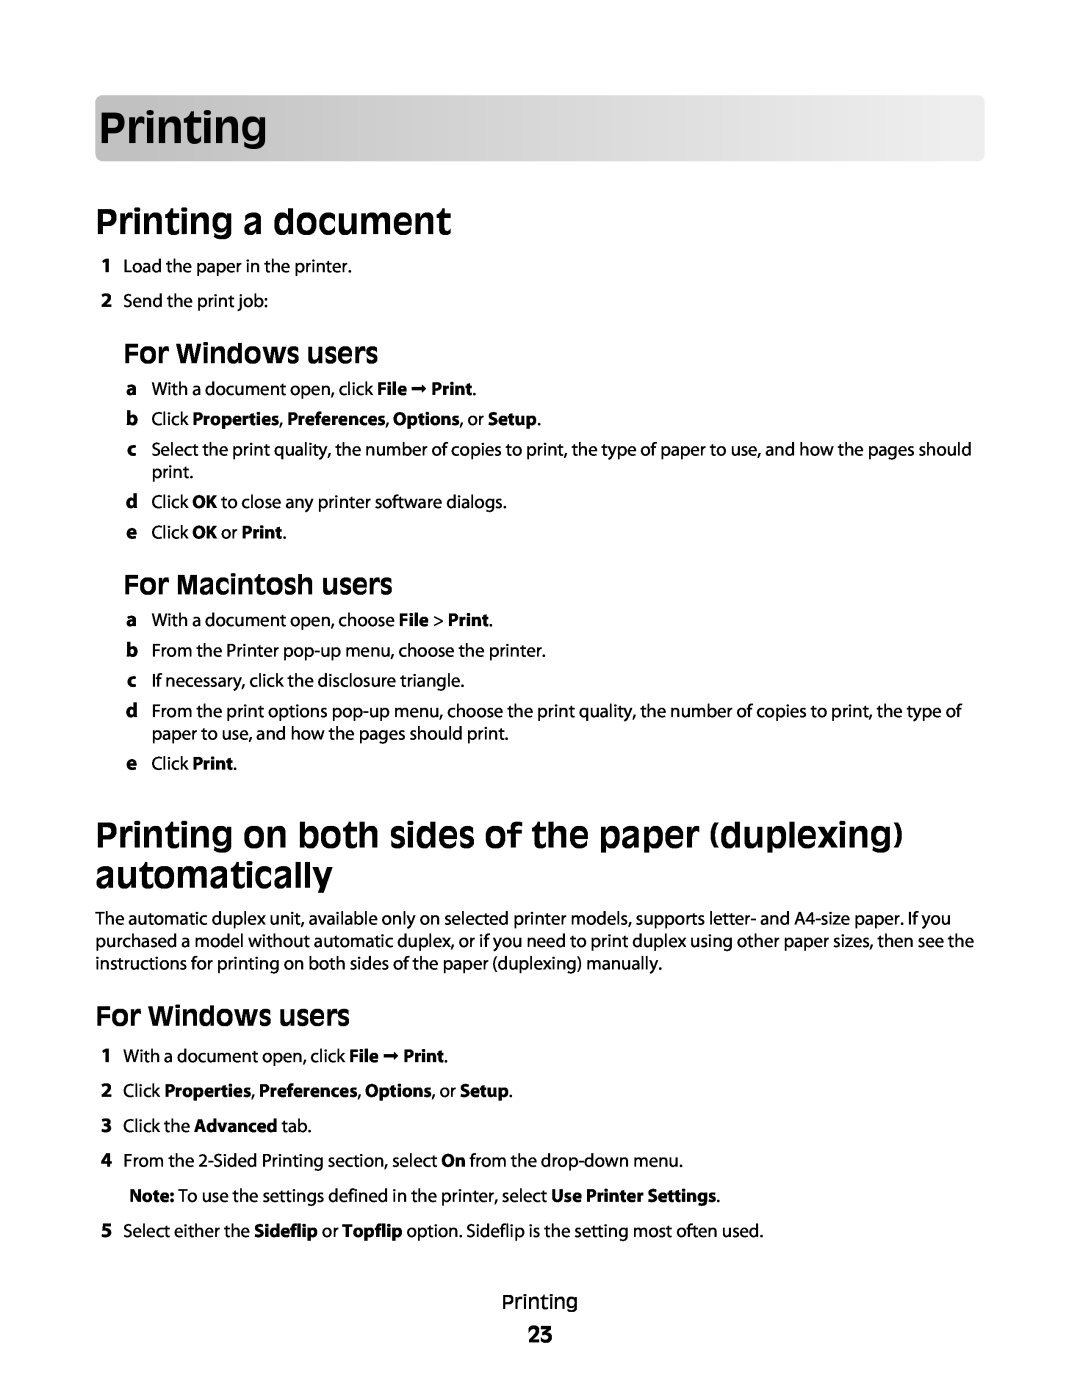 Lexmark S600 manual Prin ting, Printing a document, b Click Properties, Preferences, Options, or Setup, For Windows users 